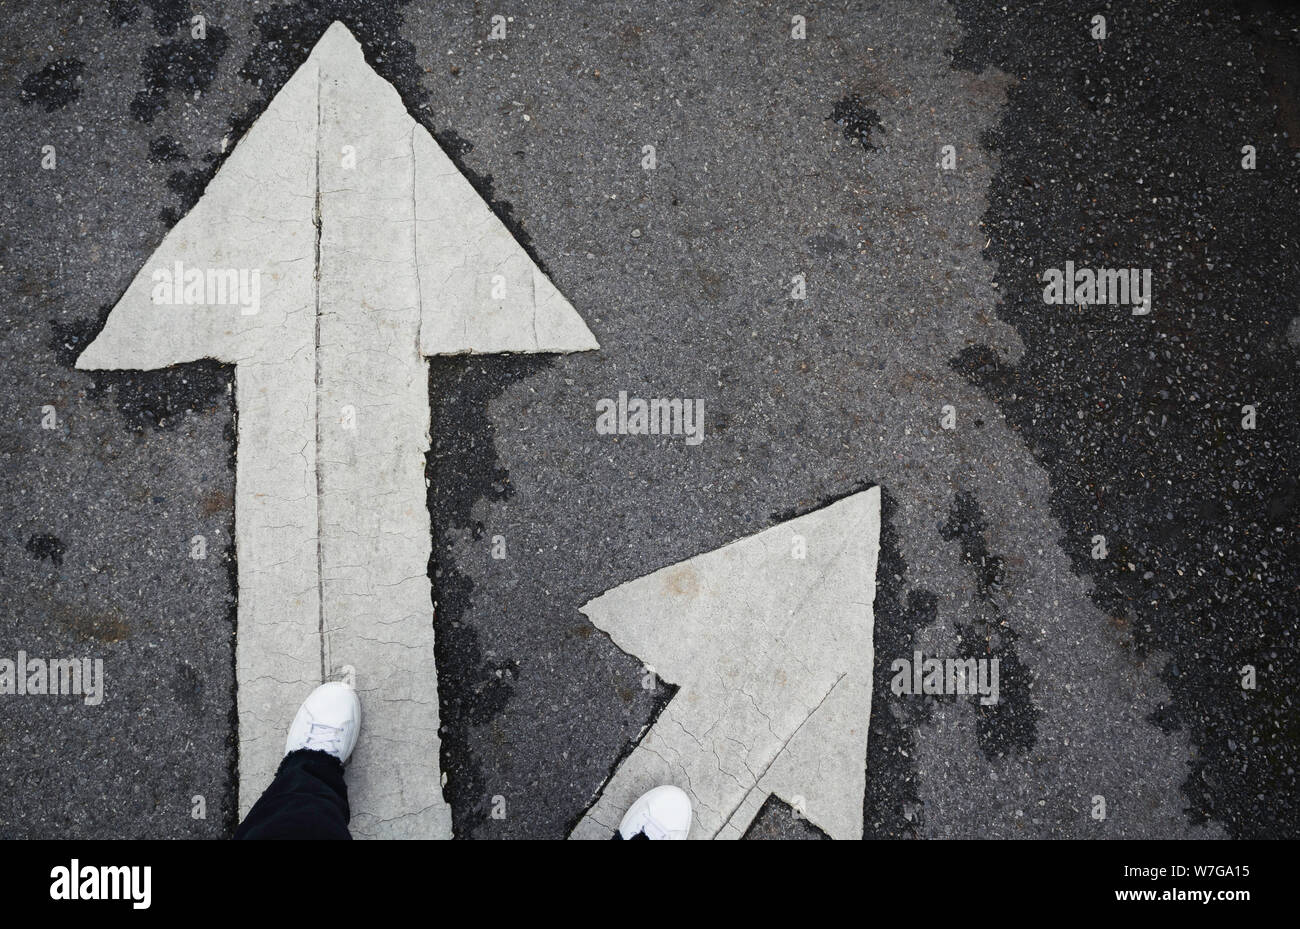 People standing at the crossroad and get to decision which way to go with copy space for insert text. Two ways to choose concept. Stock Photo